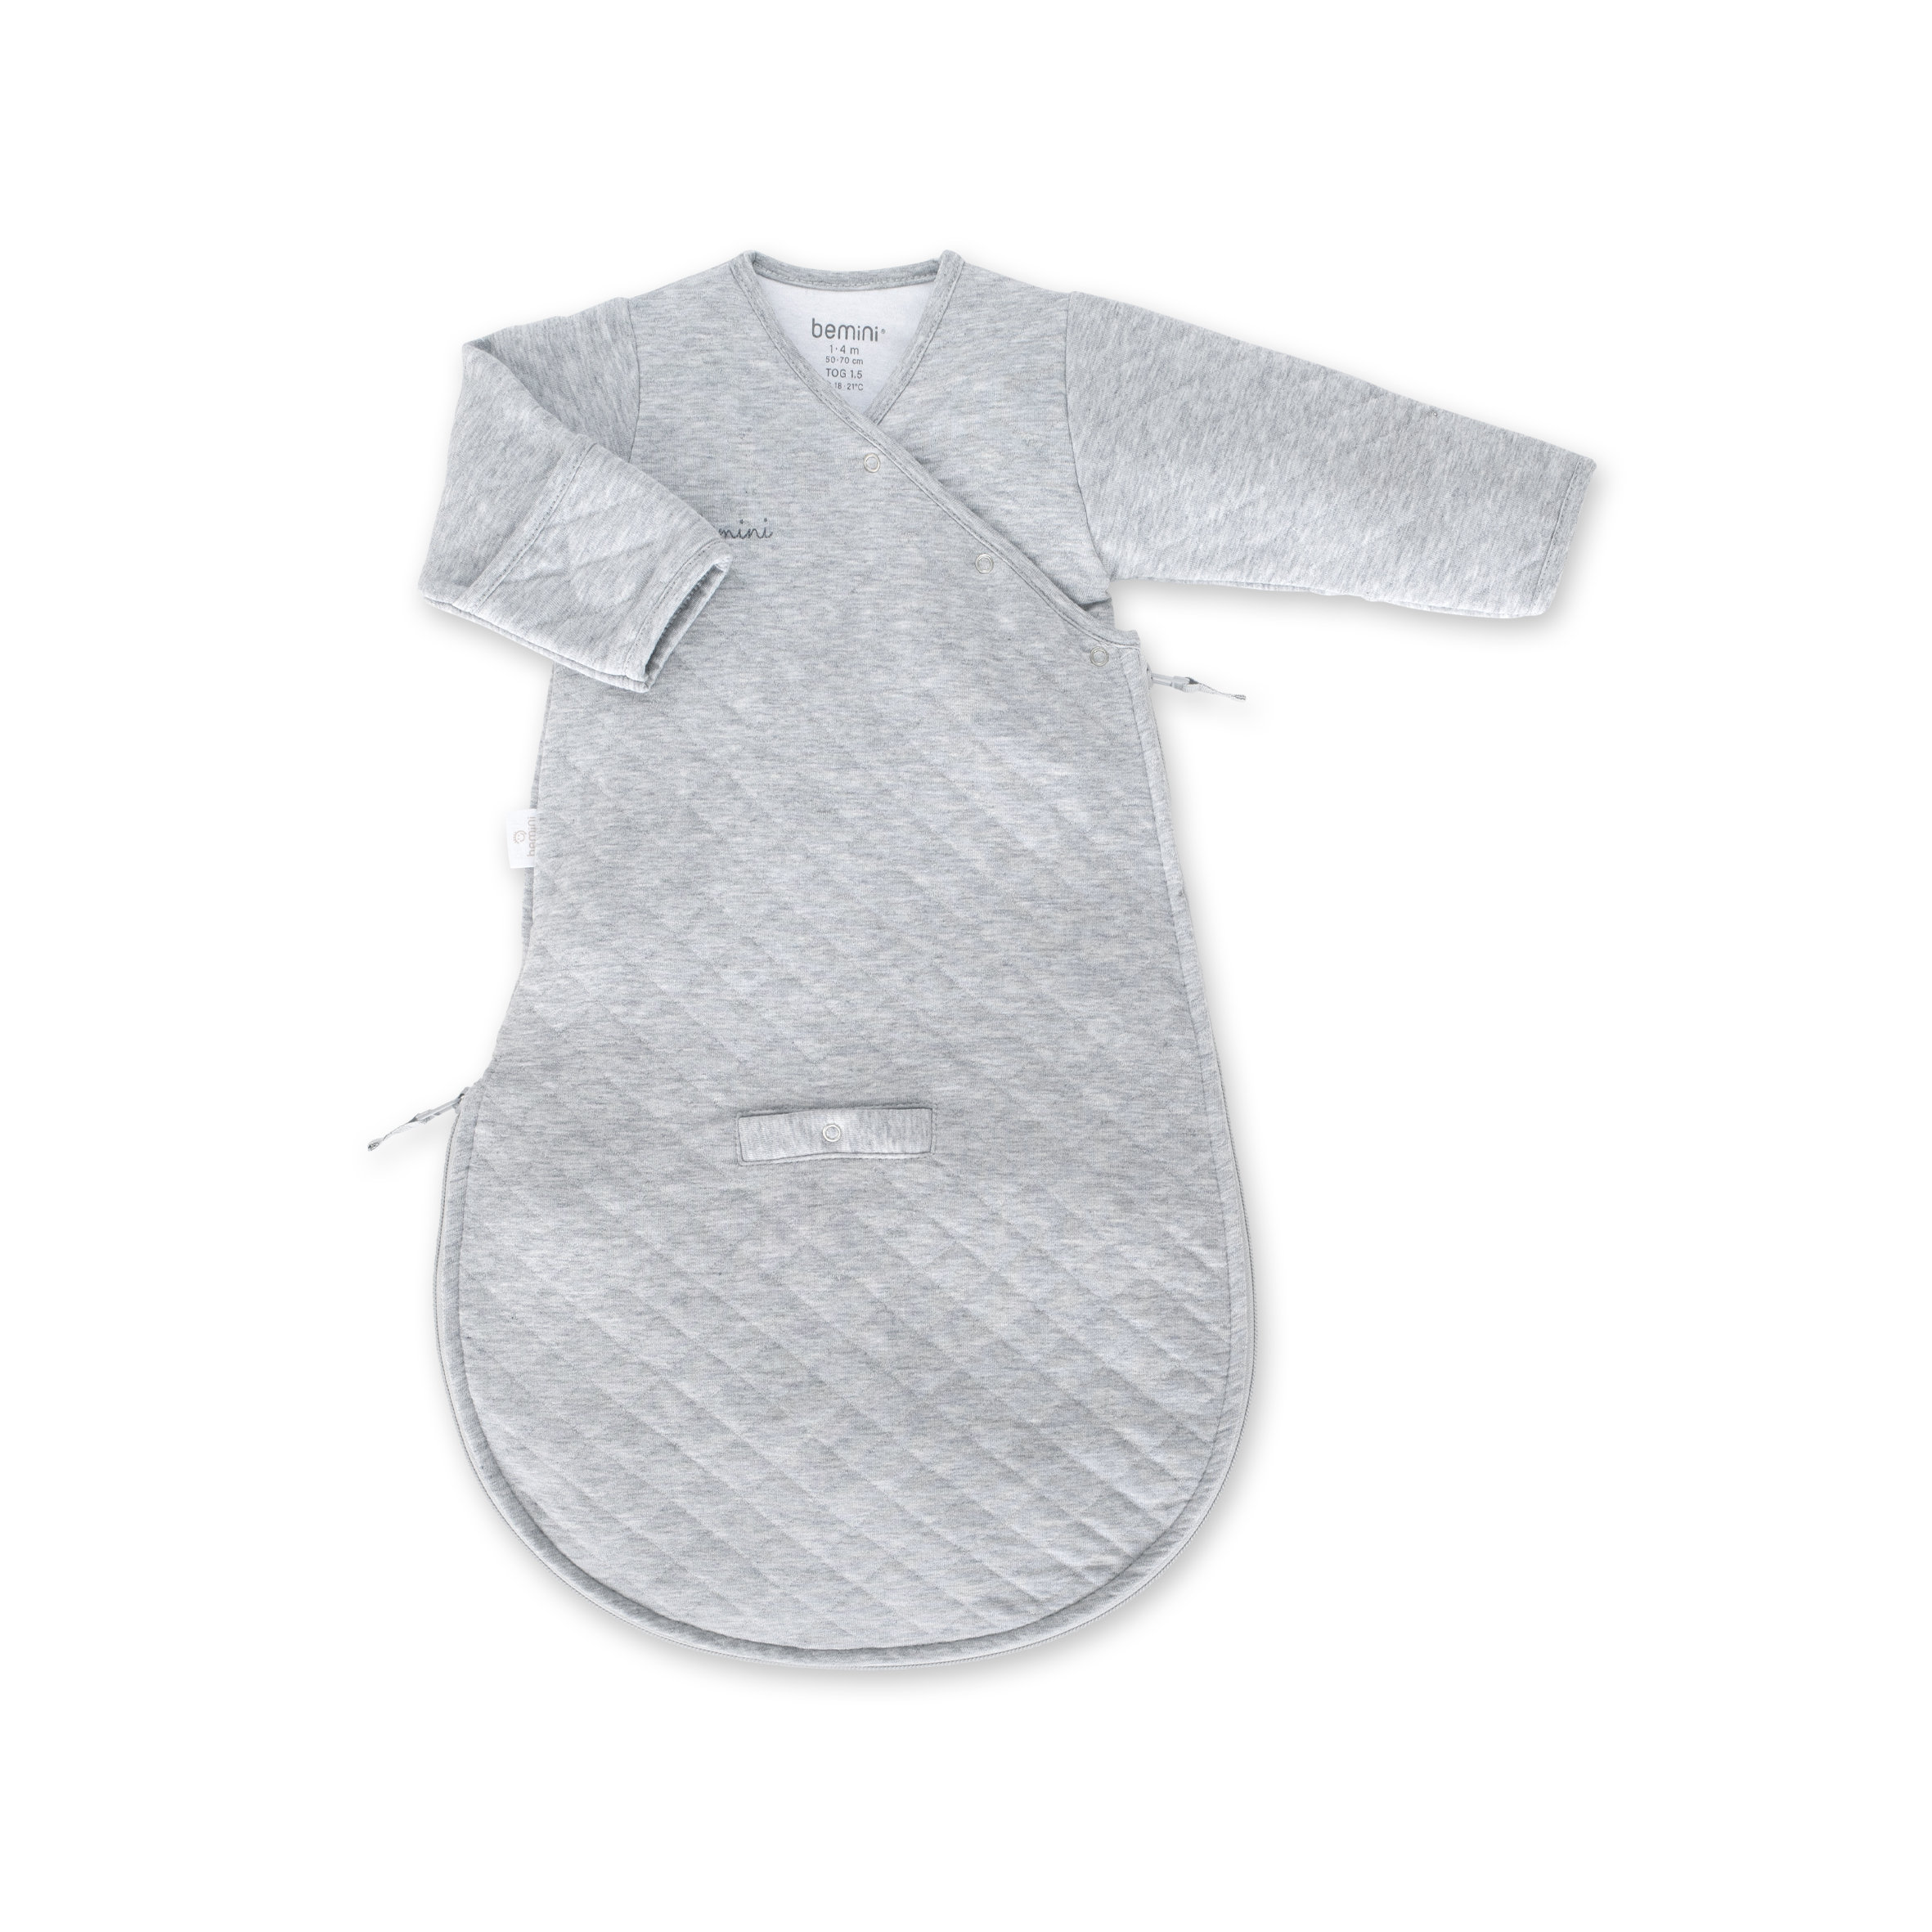 MAGIC BAG Quilted jersey 1-4m QUILT Mix grey tog 1.5